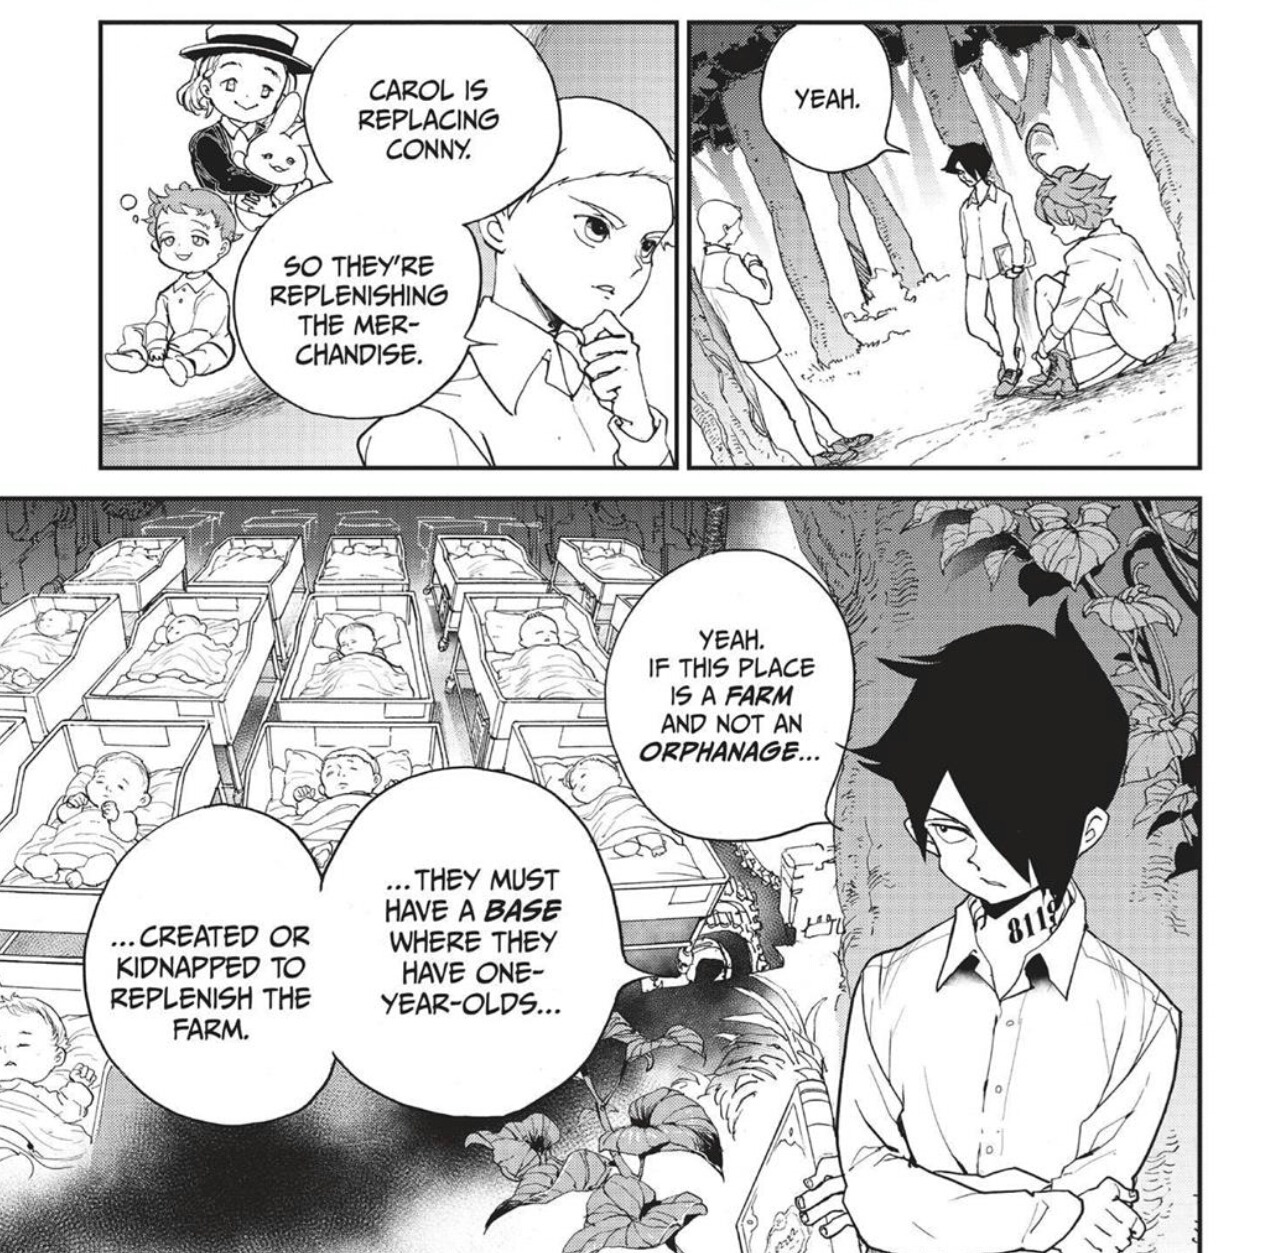 Return to Grace Field Arc, The Promised Neverland Wiki